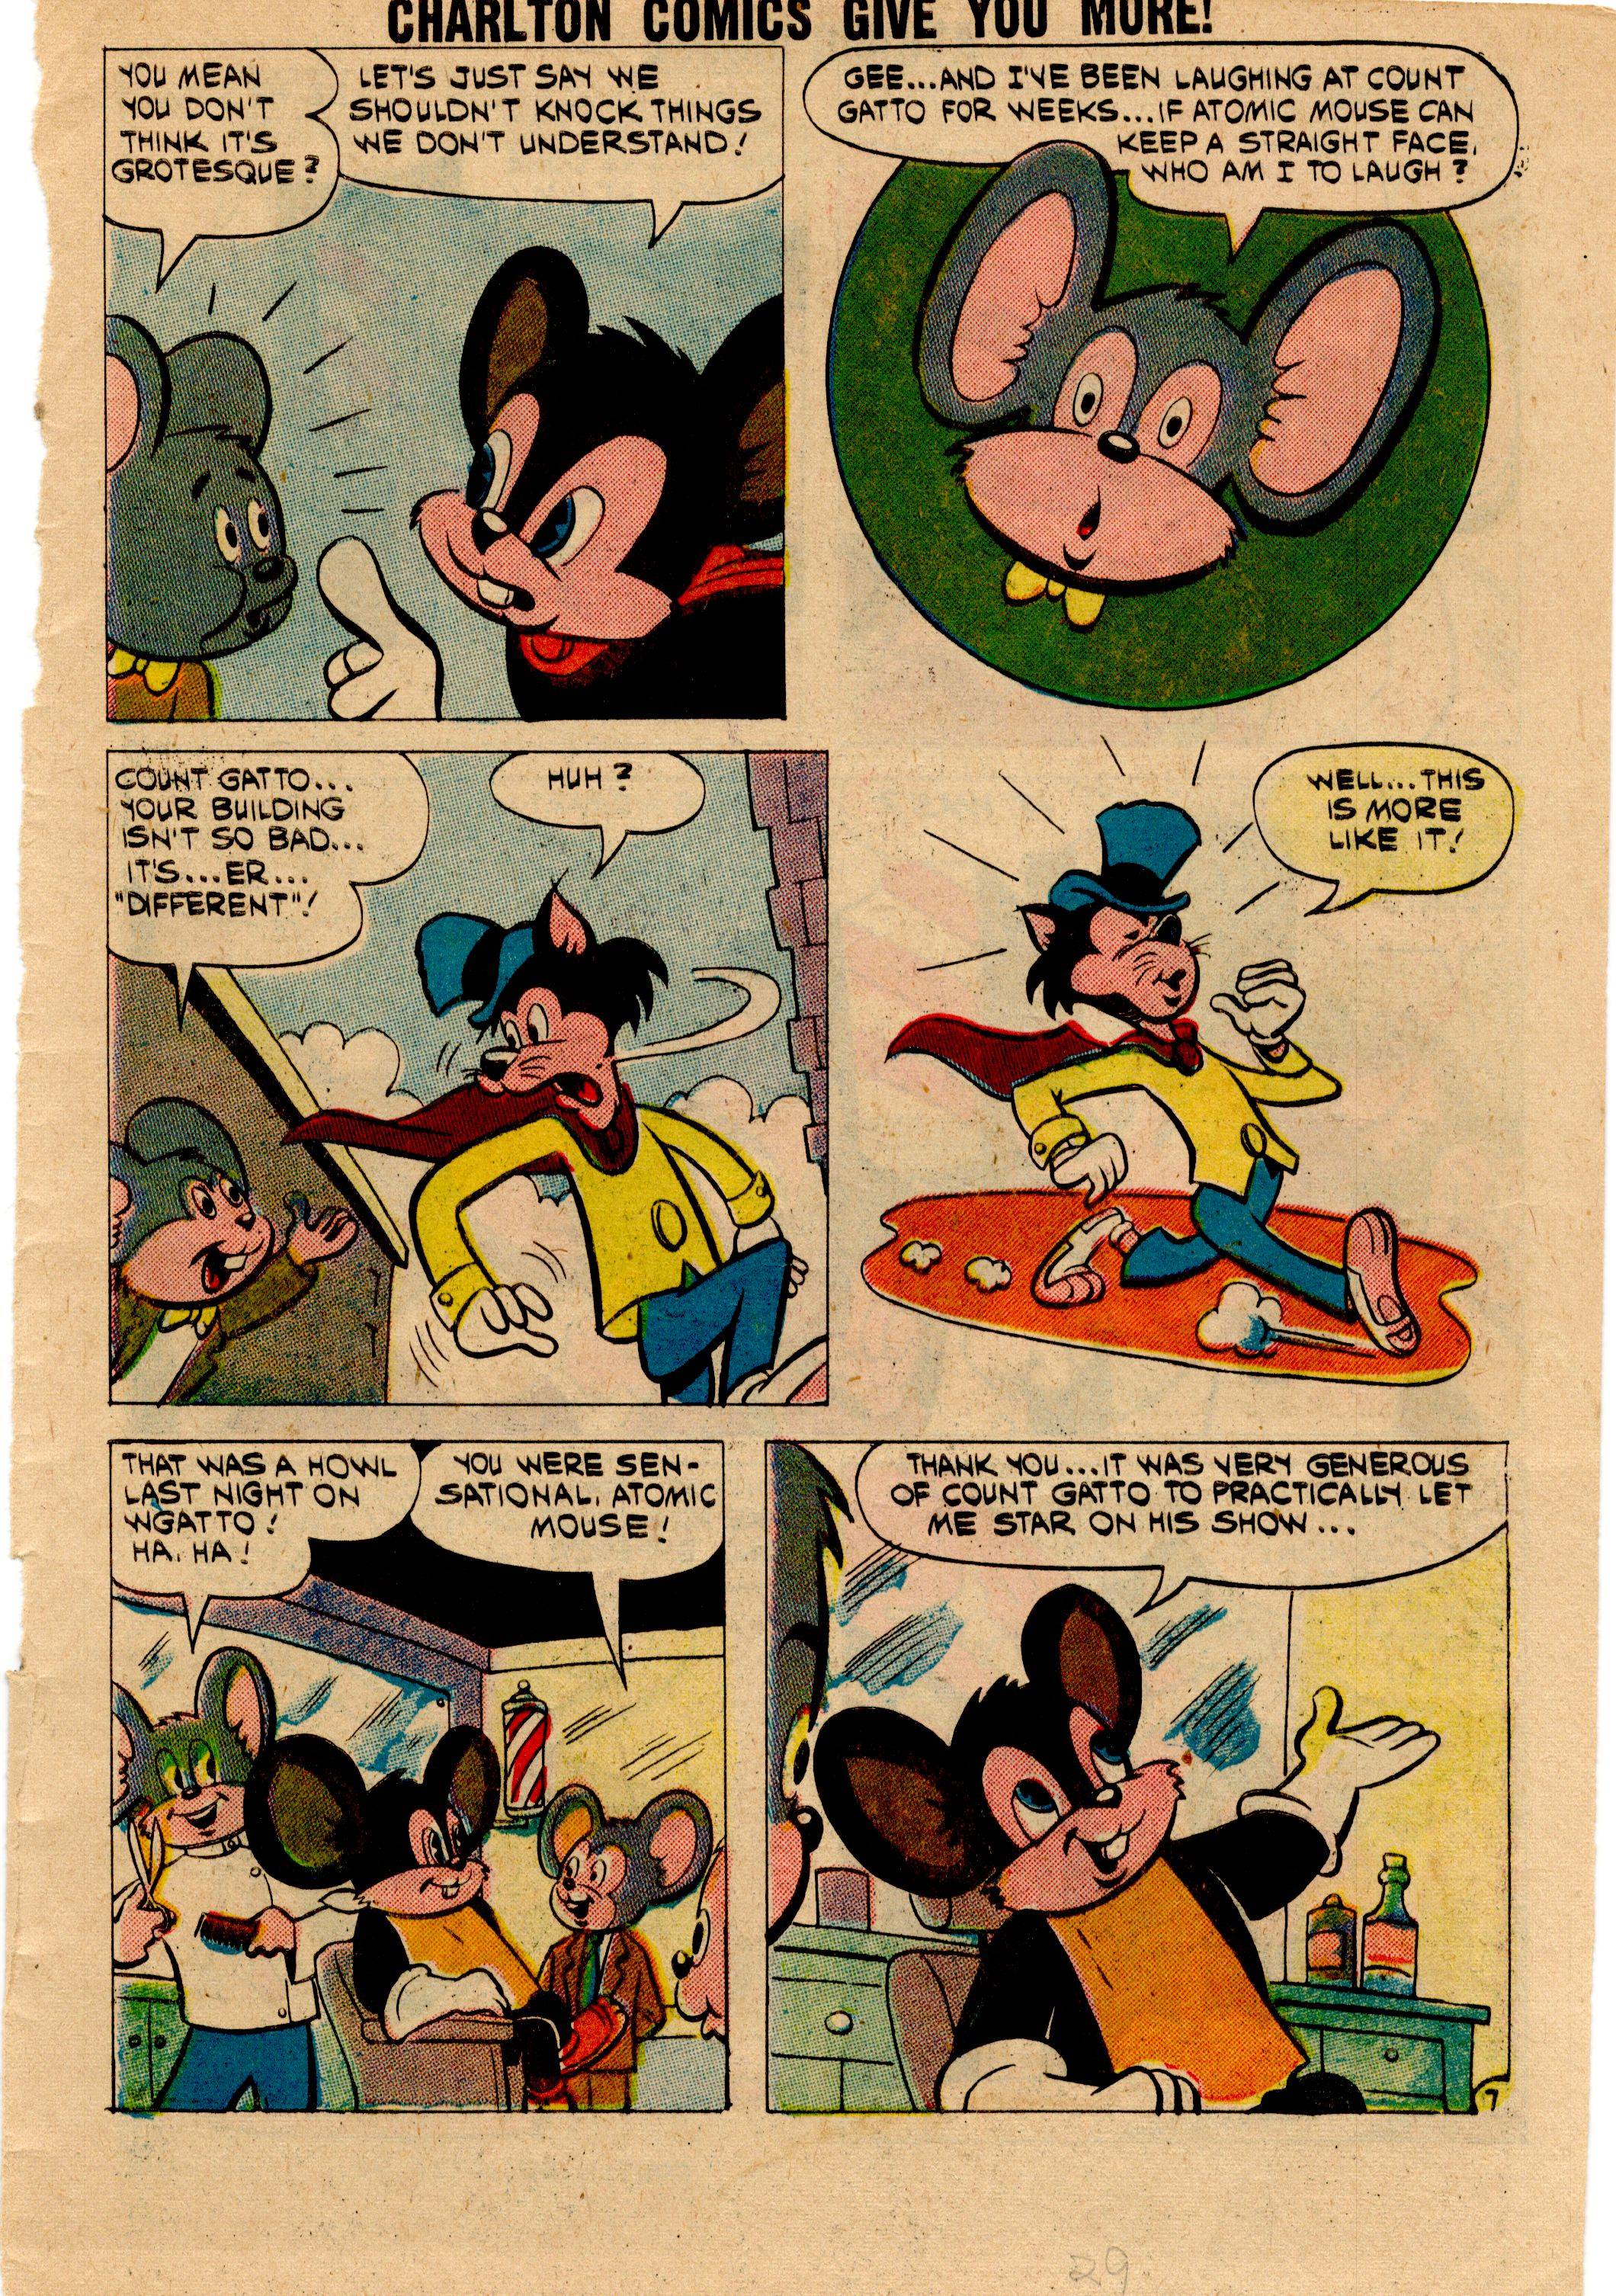 Read online Atomic Mouse comic -  Issue #44 - 27